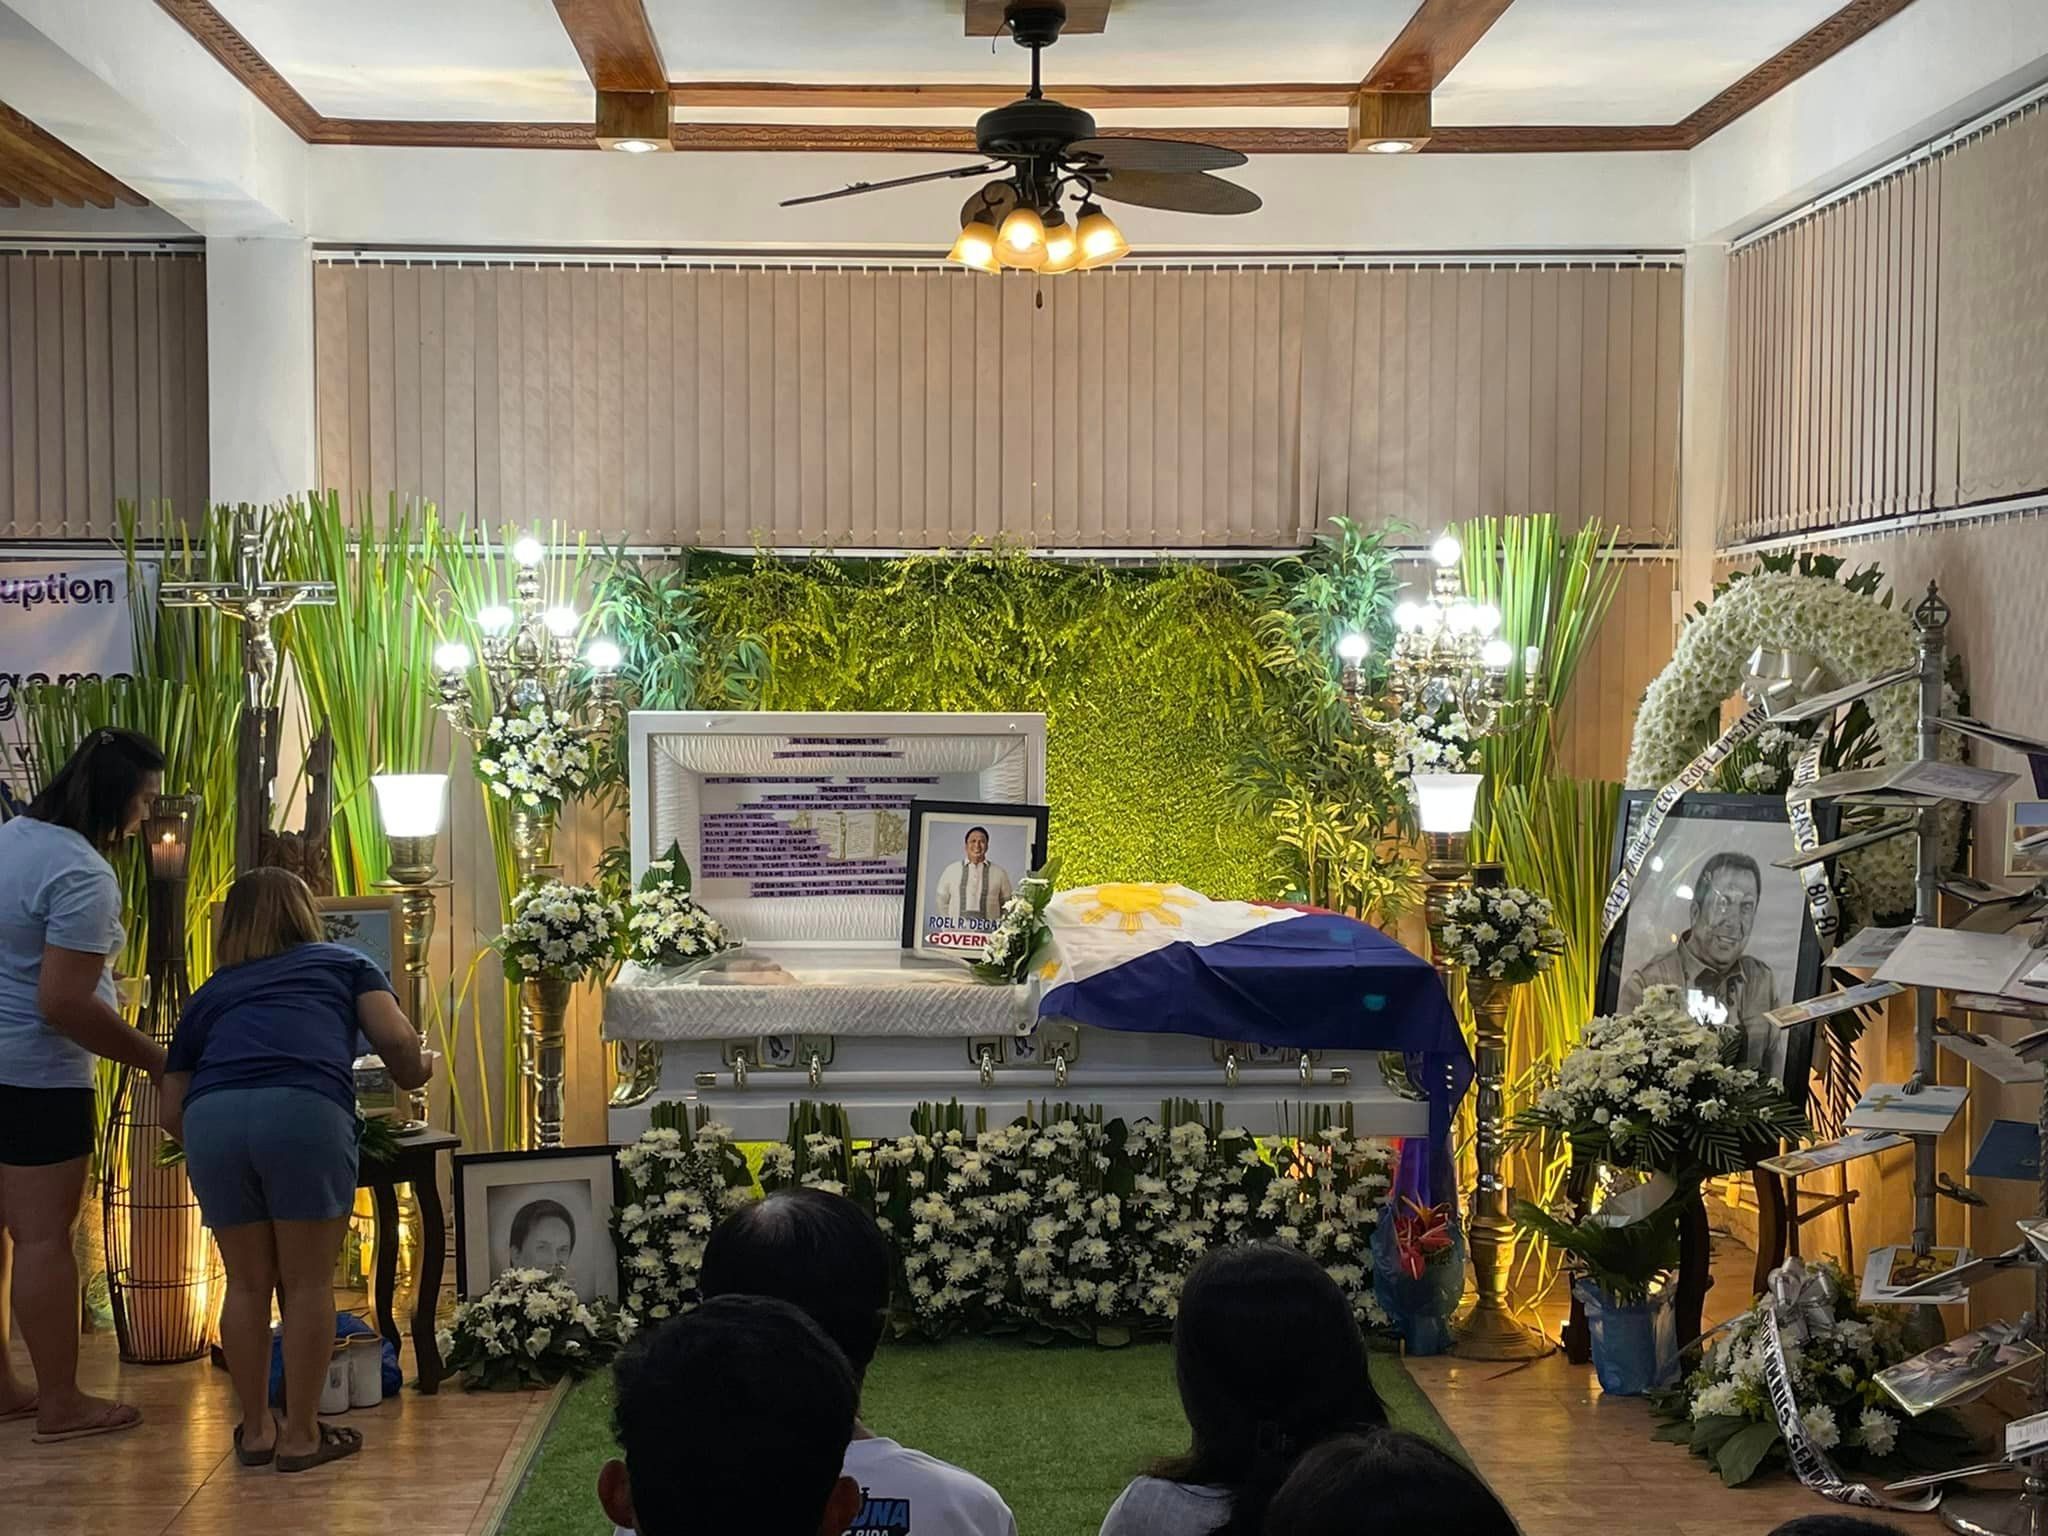 Thousands expected at funeral of slain Negros Oriental governor Degamo